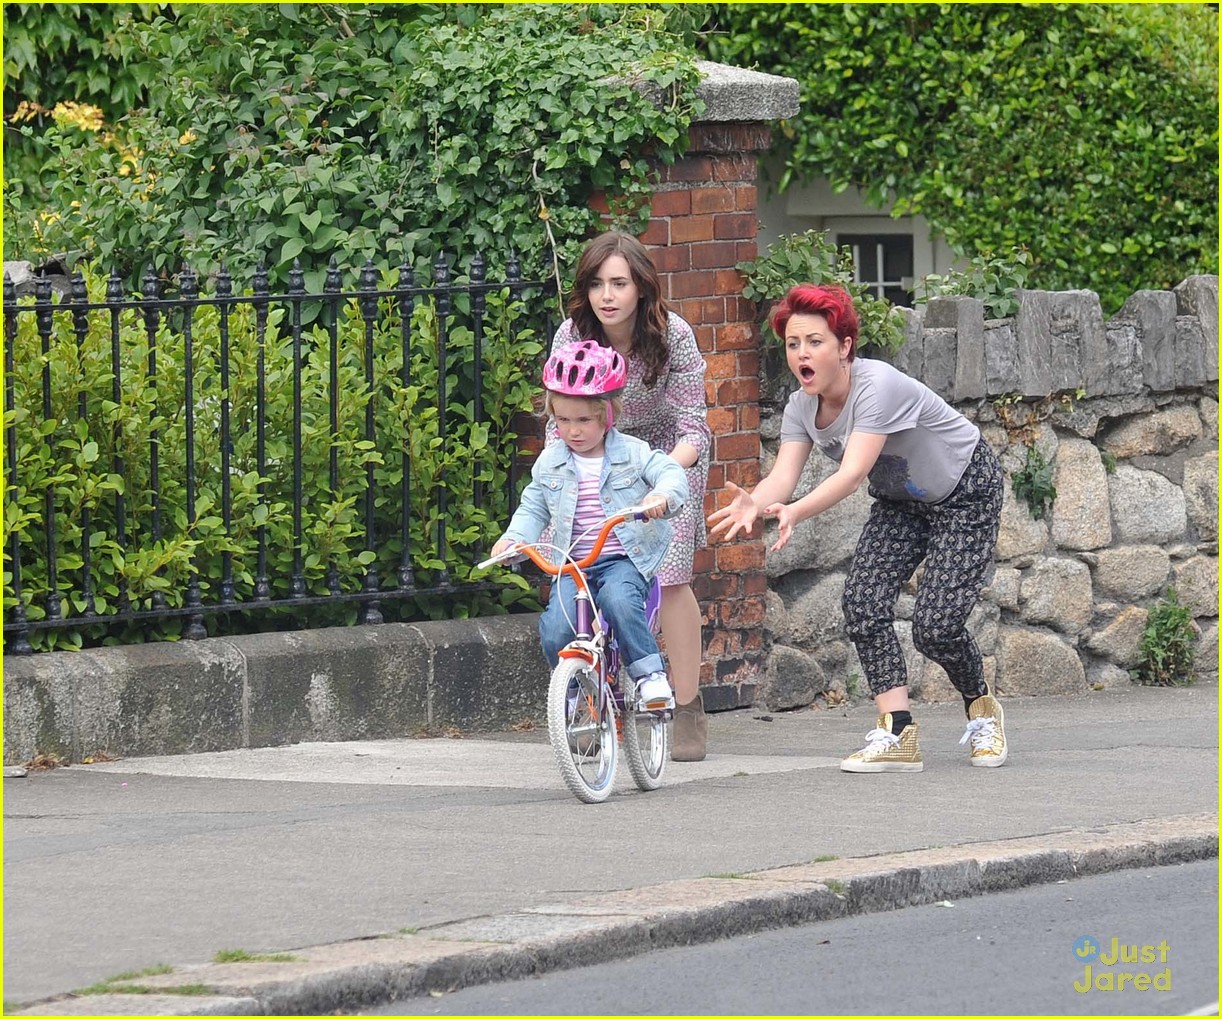 lily collins bicycle ride watch 07